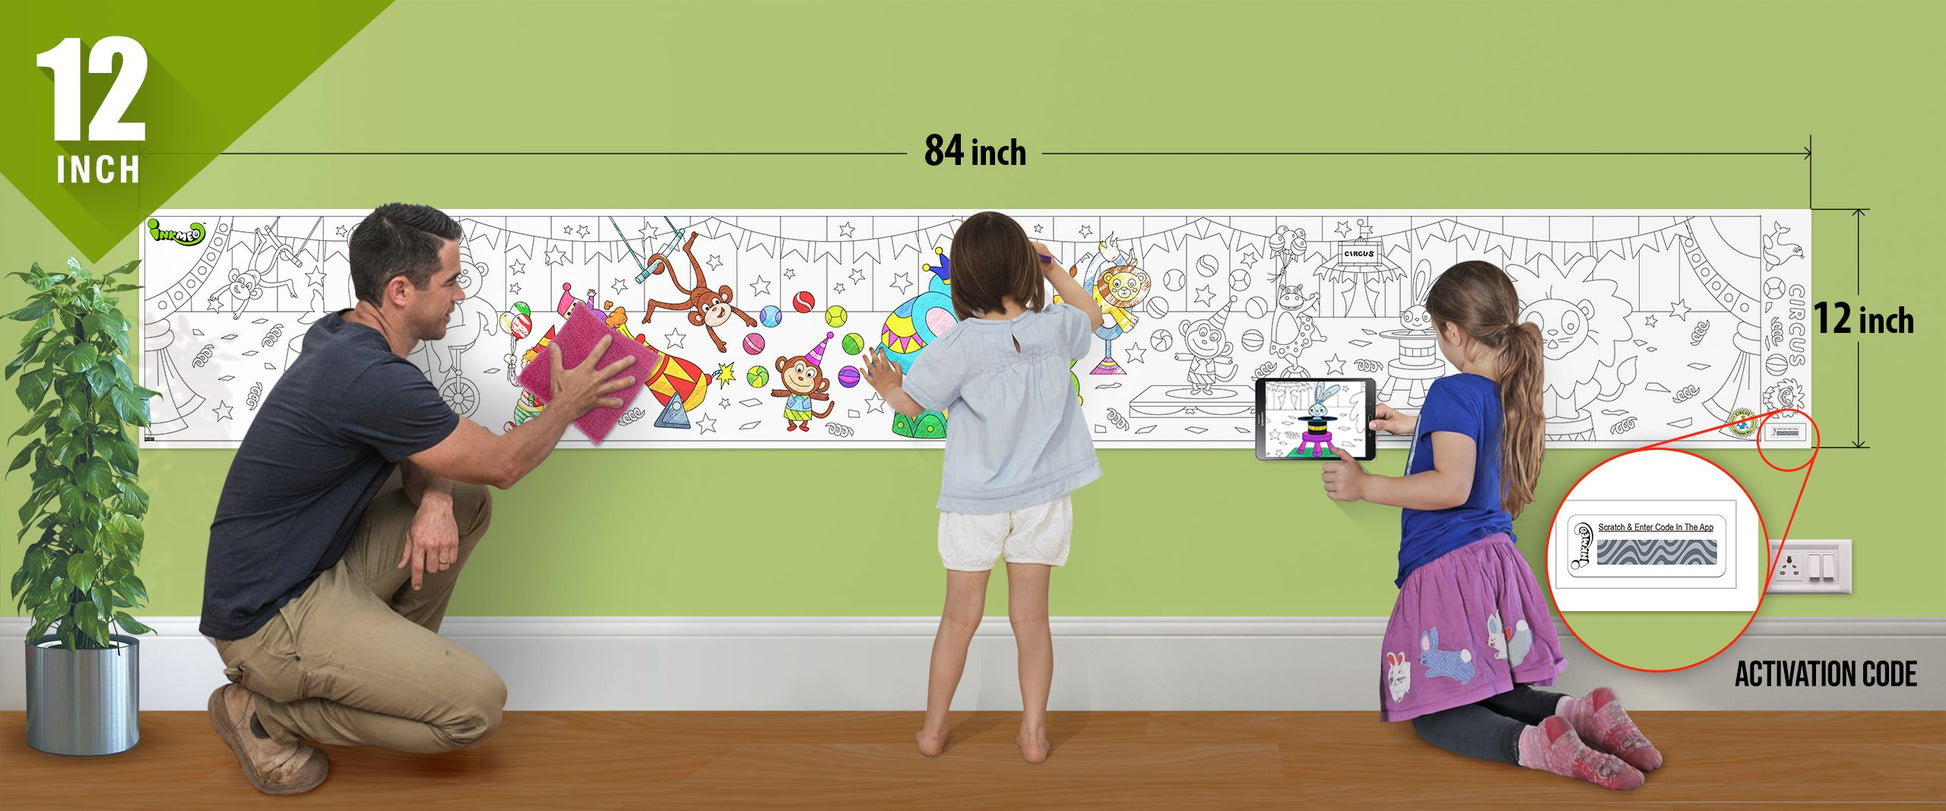 The image depicts a father and his two daughters enjoying a bonding moment while colouring circus sheet attached to the wall.